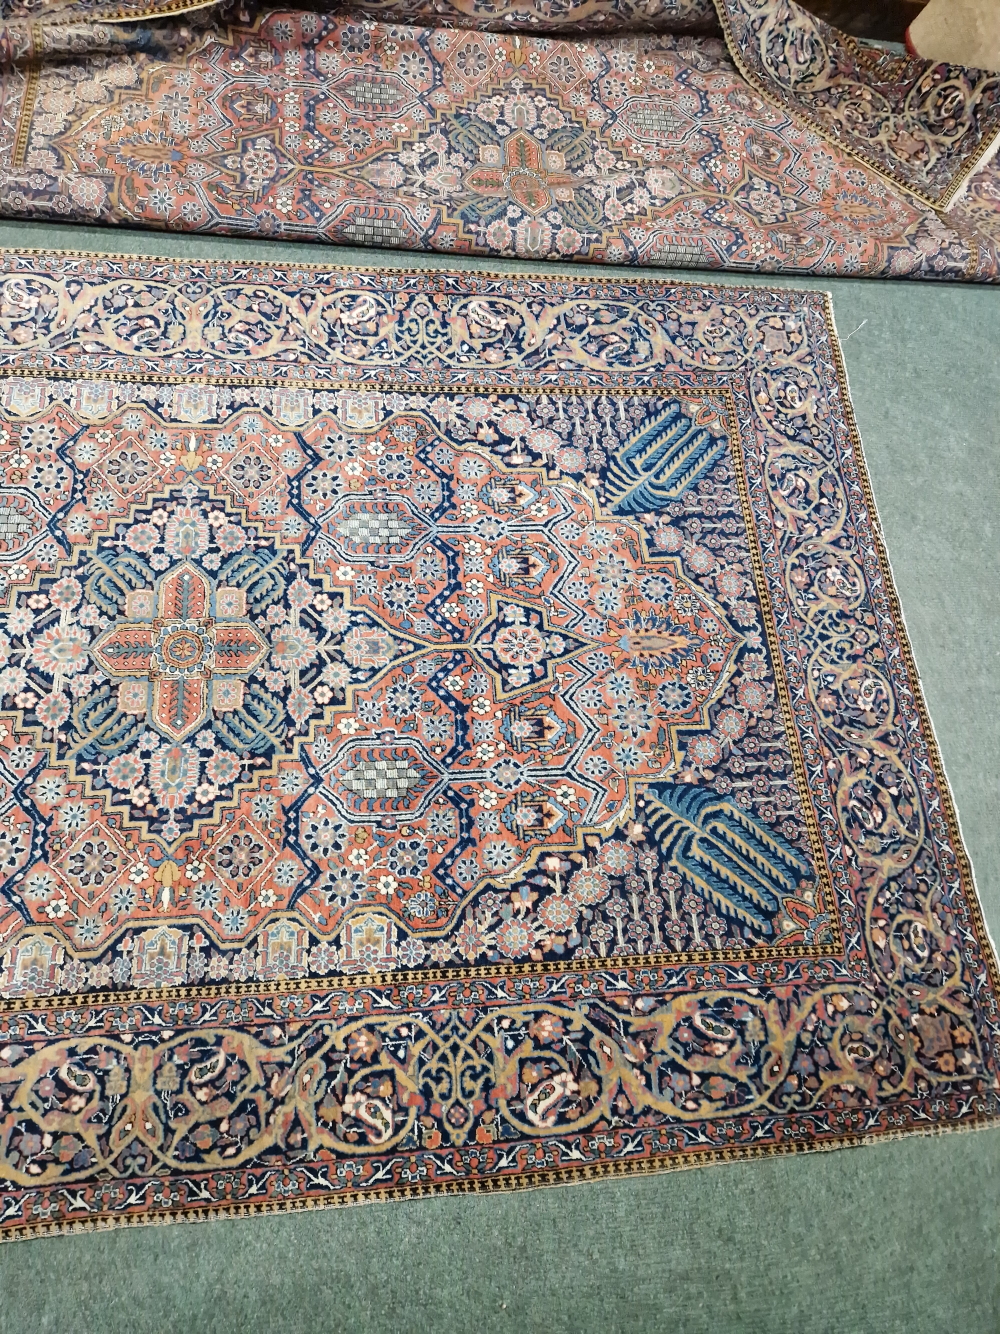 A PAIR OF ANTIQUE PERSIAN KASHAN RUGS. 298 x 132cms - Image 11 of 12